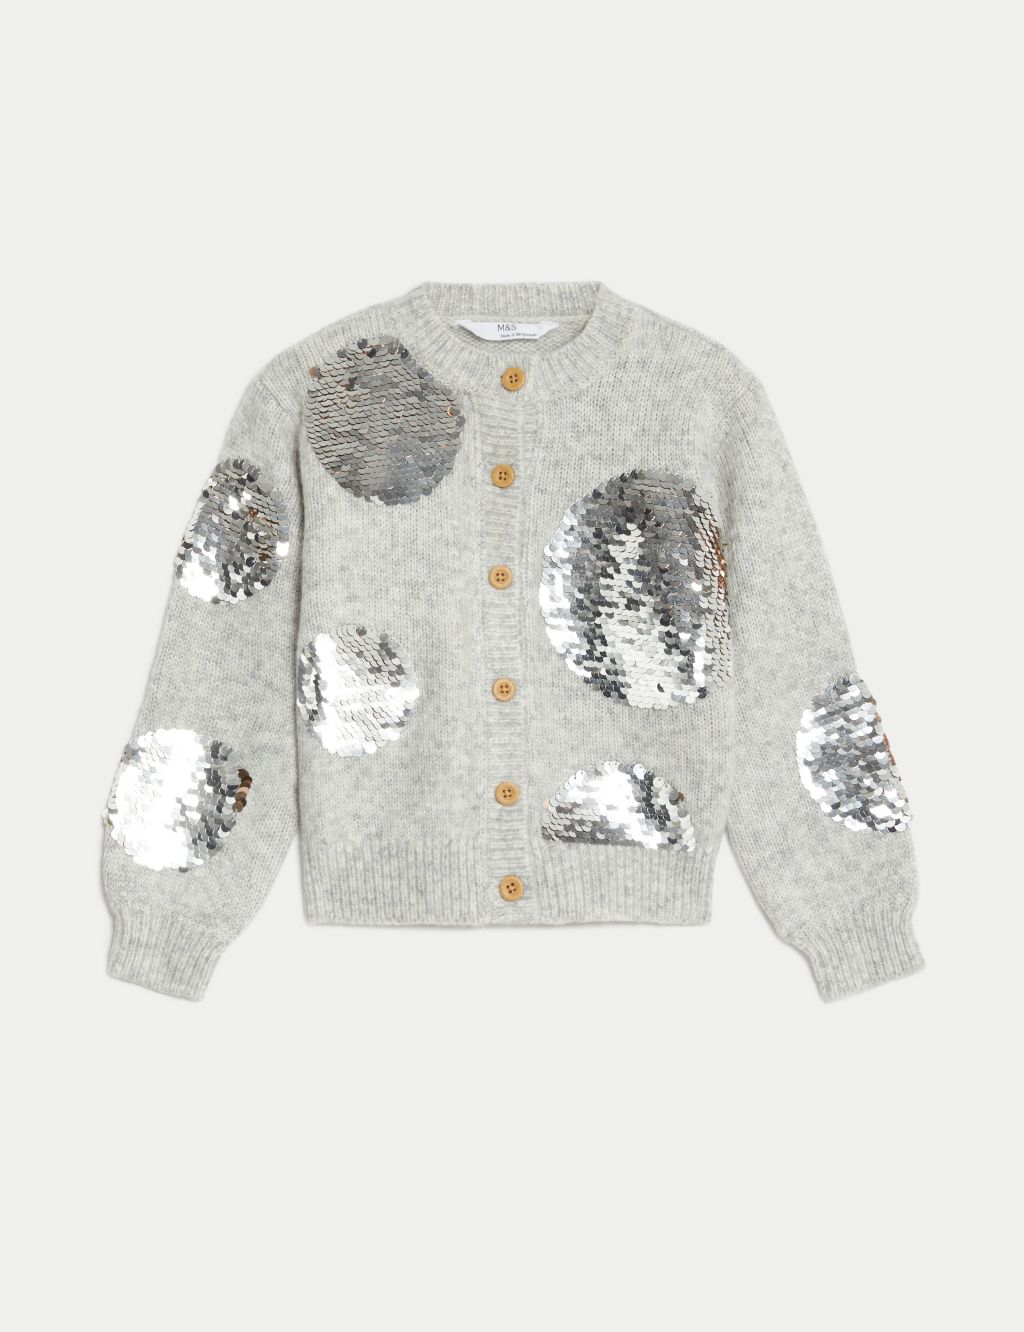 Sequin Spot Knitted Cardigan (2-8 Yrs) image 2